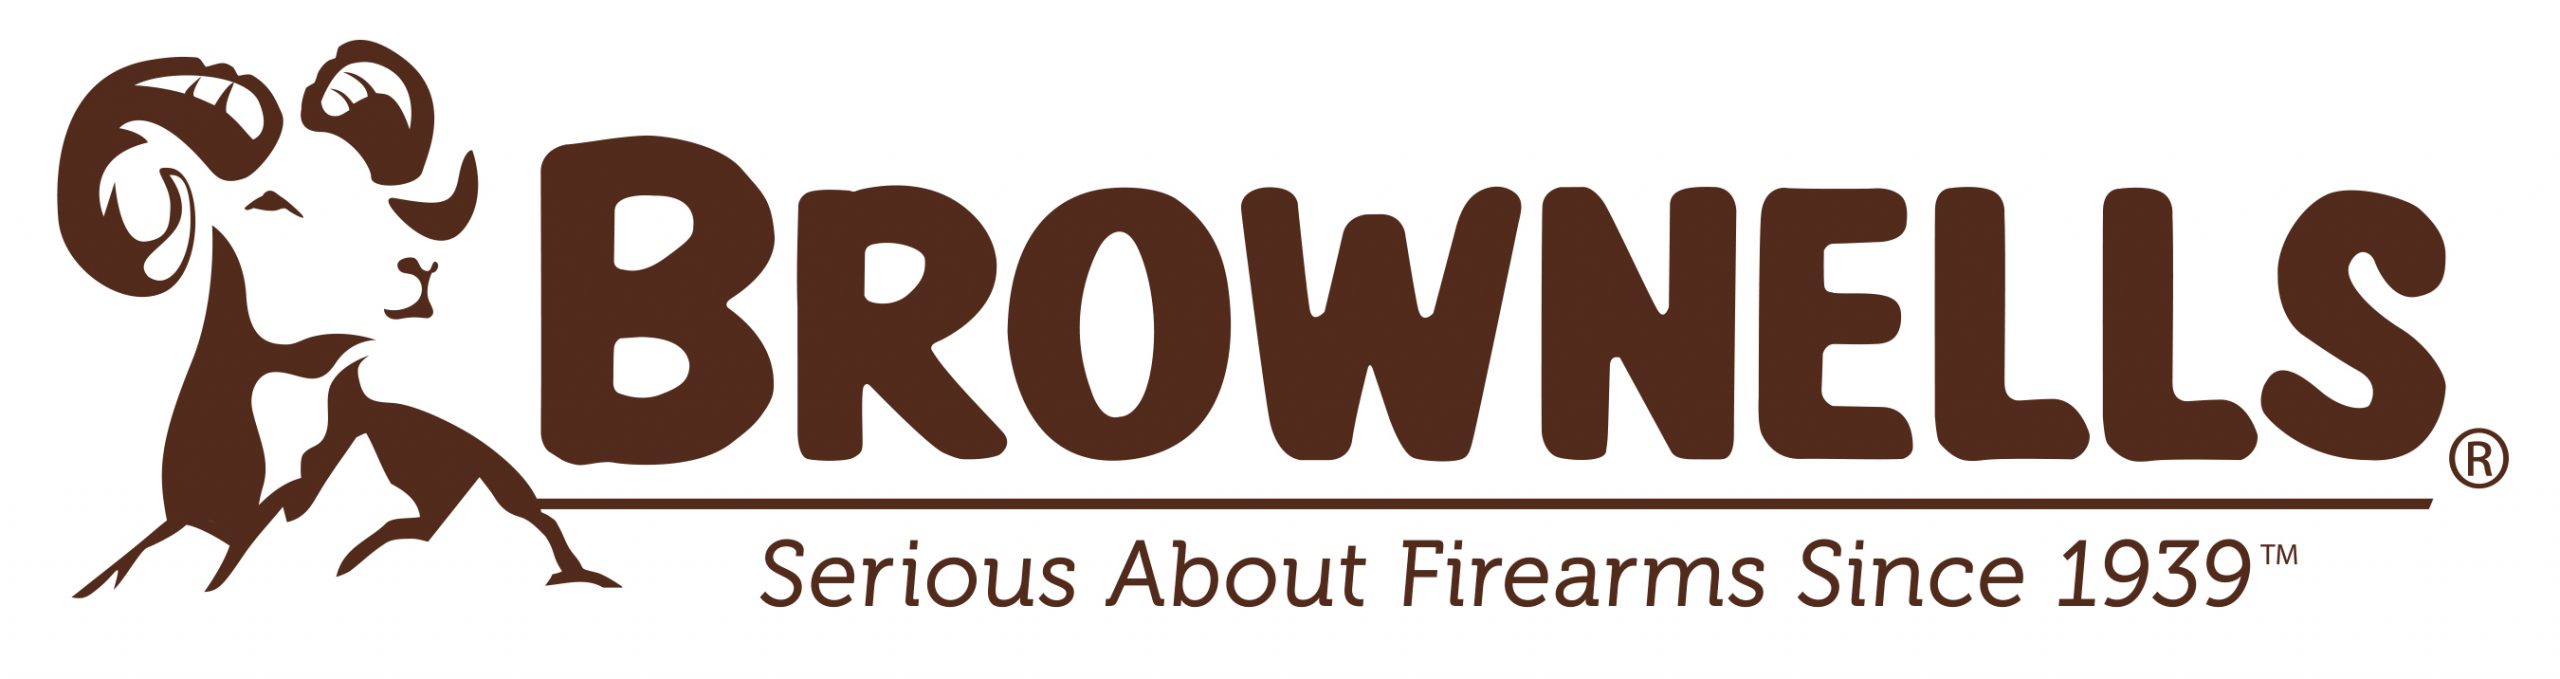 BROWNELLS - 10% off all ammunition